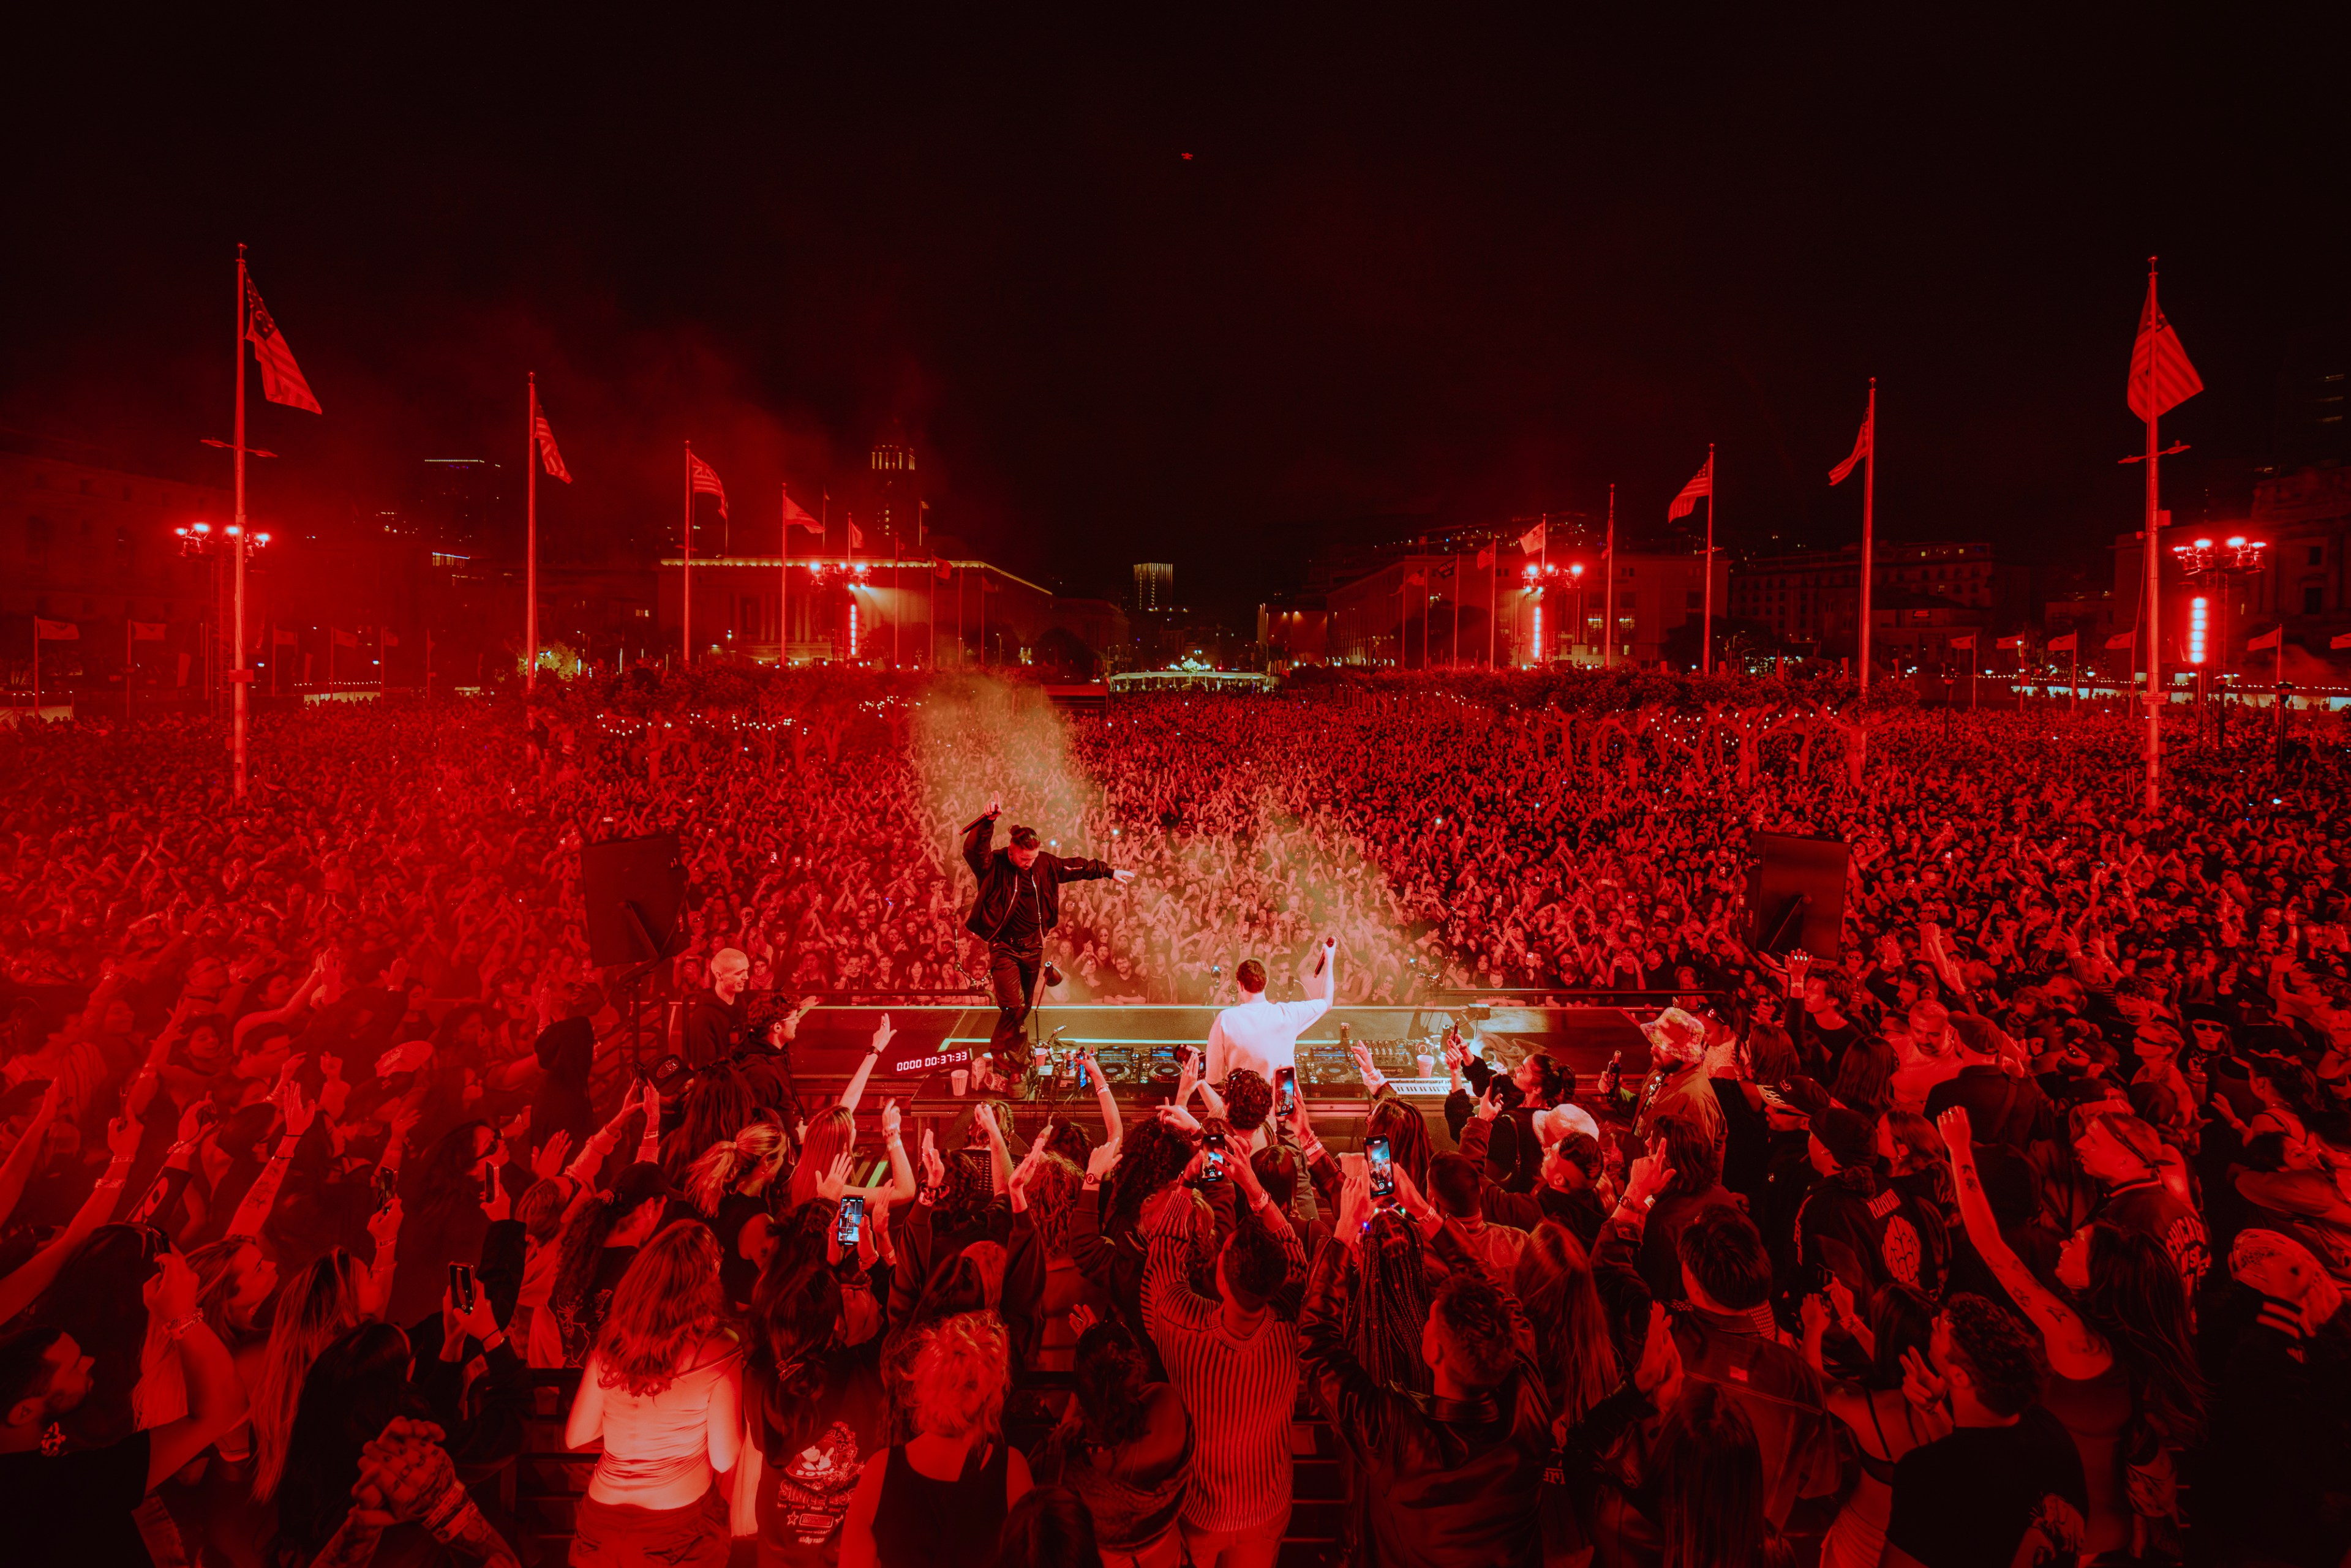 The image depicts a nighttime concert with a massive crowd of enthusiastic fans, illuminated in red light. Two performers stand on stage, engaging with the energized audience.